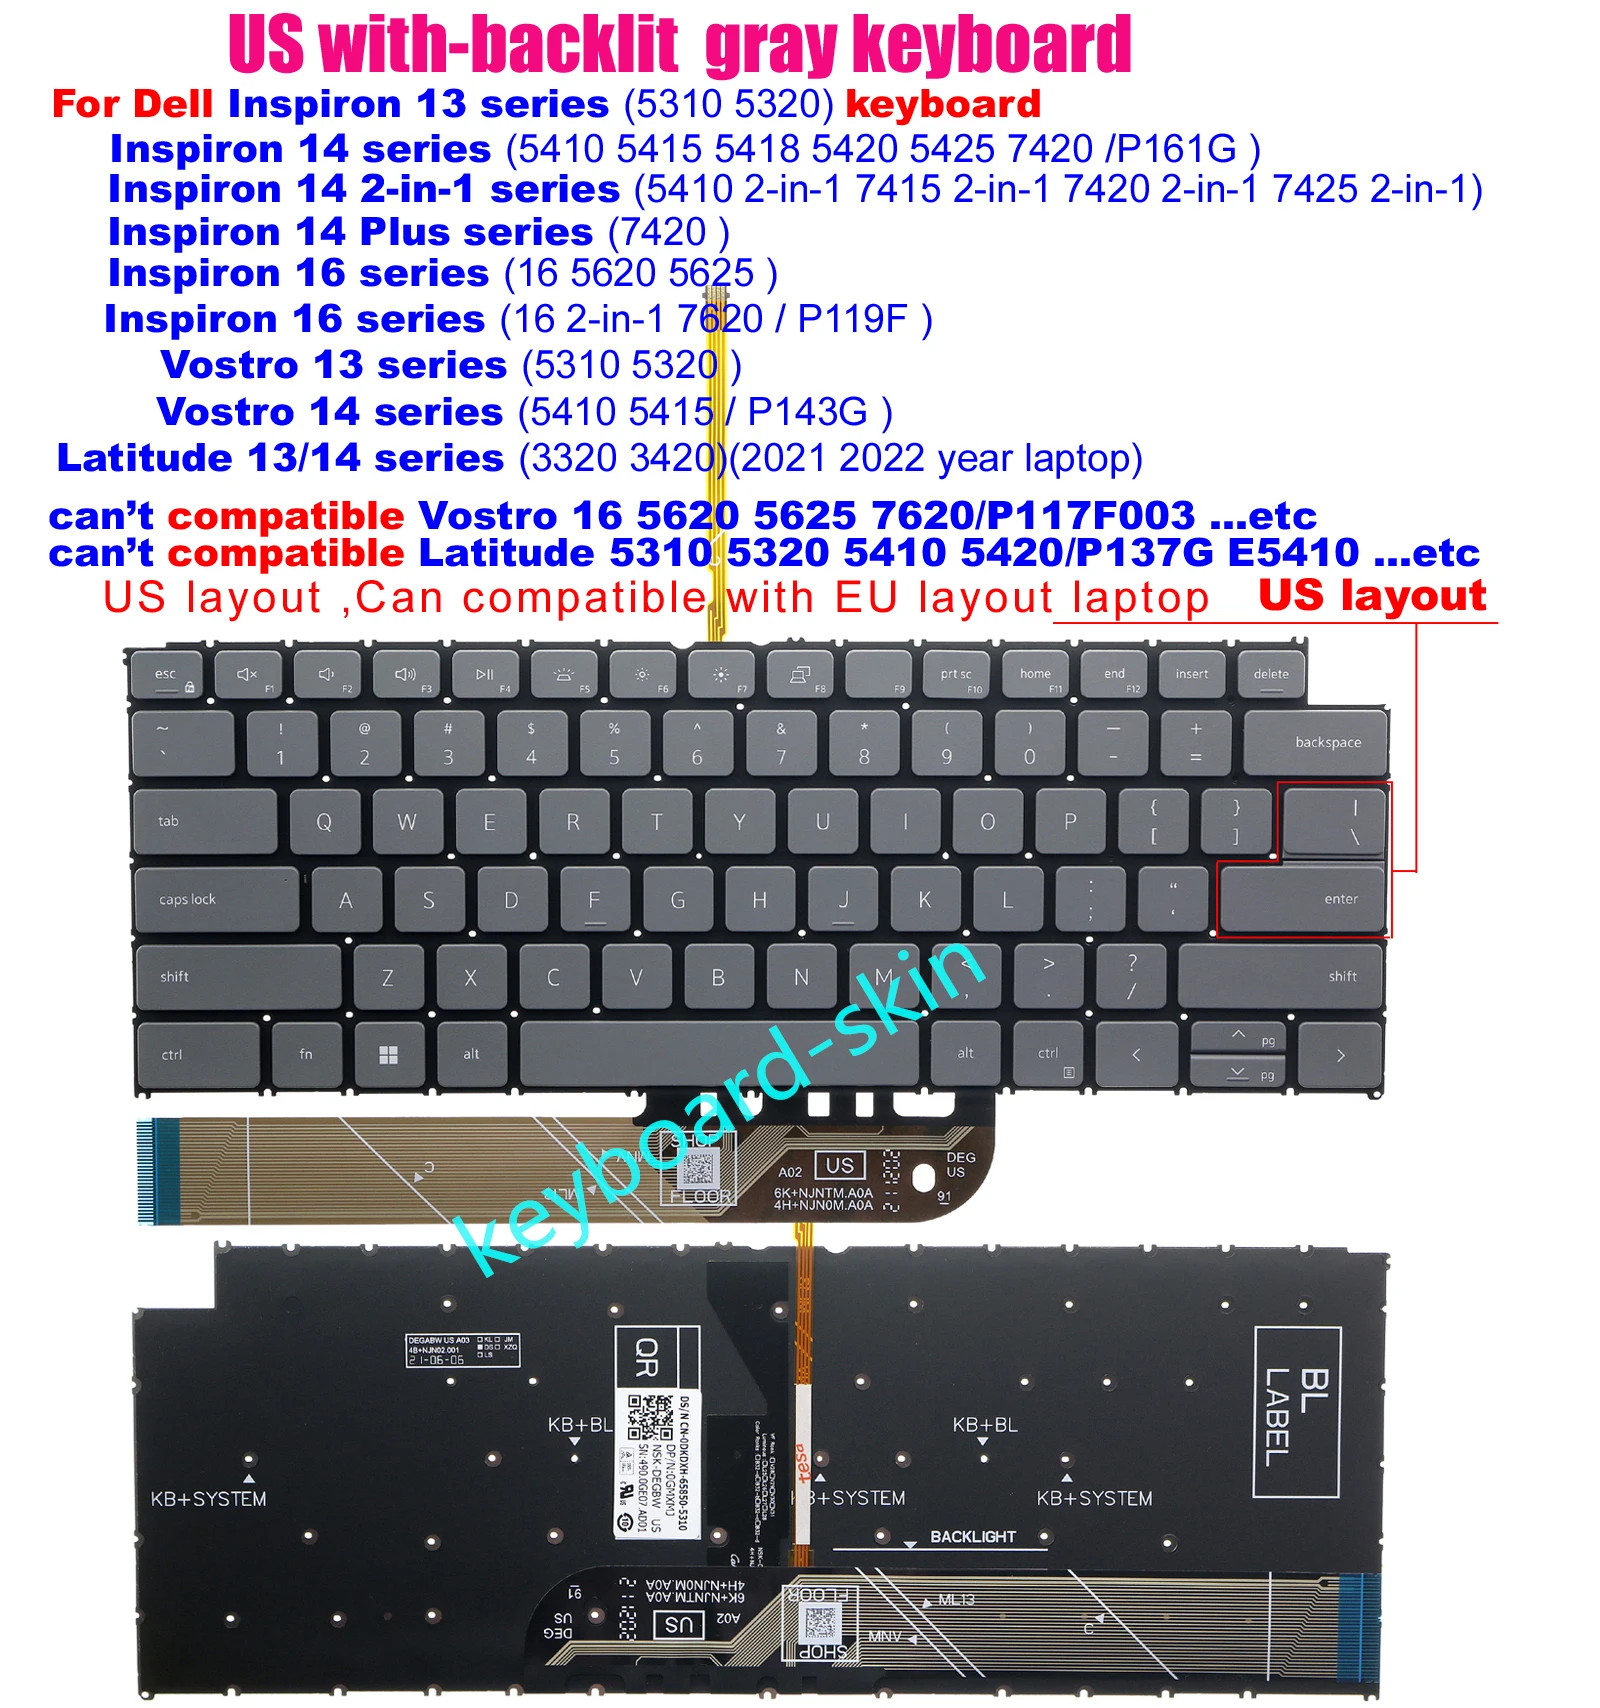 

US backlit Keyboard For Dell Inspiron 5310 5320 5410 5418 5420 5425 7415 7425 2-in-1 16 5620 5625 7620 P119F P161G 14 Plus 7420